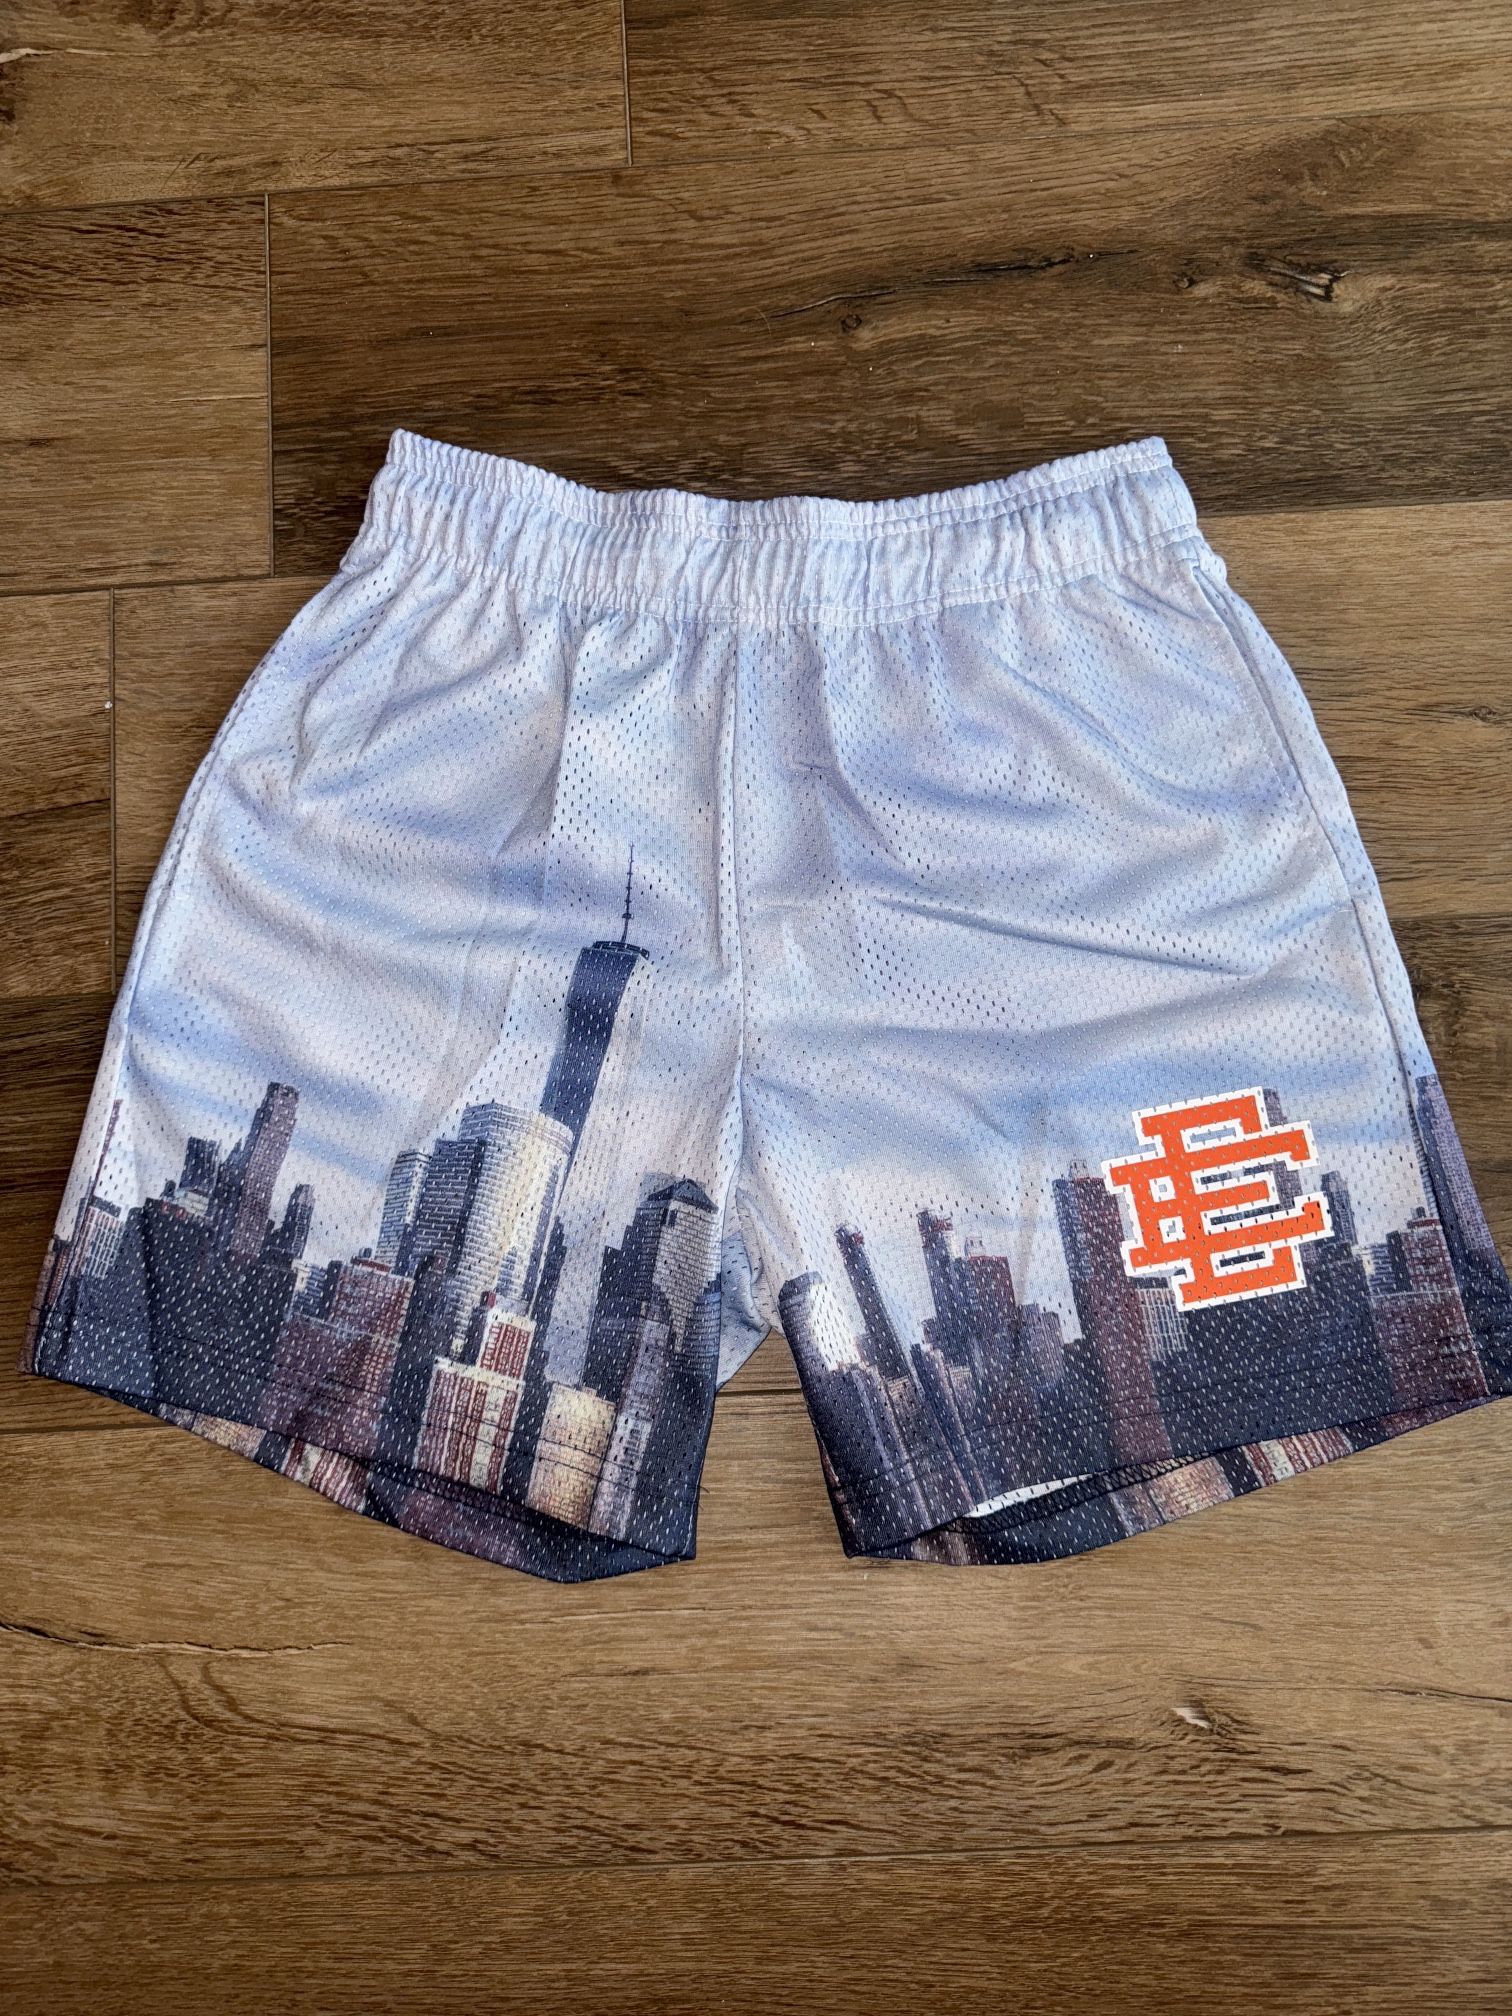 Eric Emanuel Shorts, Medium / Small Available (check out my page🔥) 